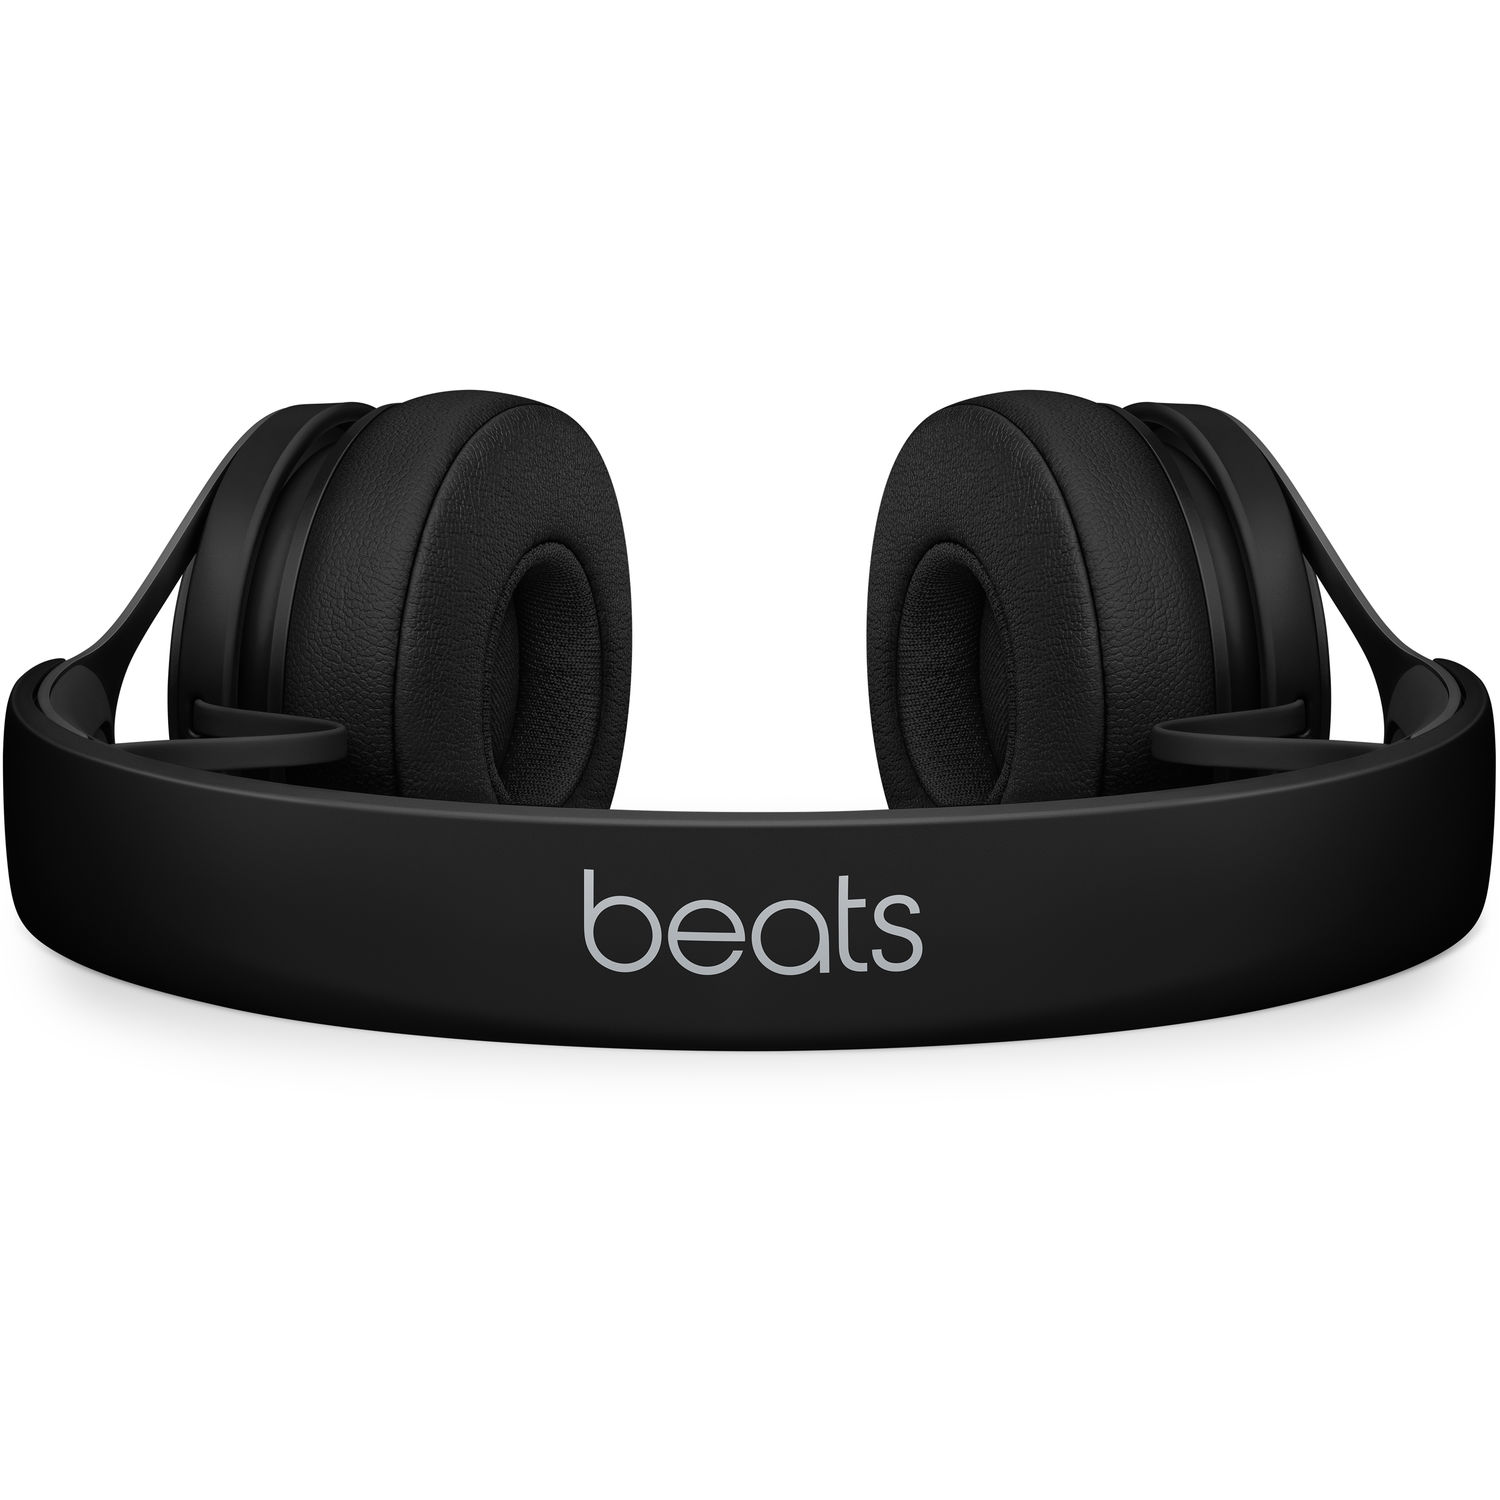 Beats EP Wired On-Ear Headphones (ML992ZM/A) - Battery Free for Unlimited Listening, Built in Mic and Controls - (Black) - image 4 of 6